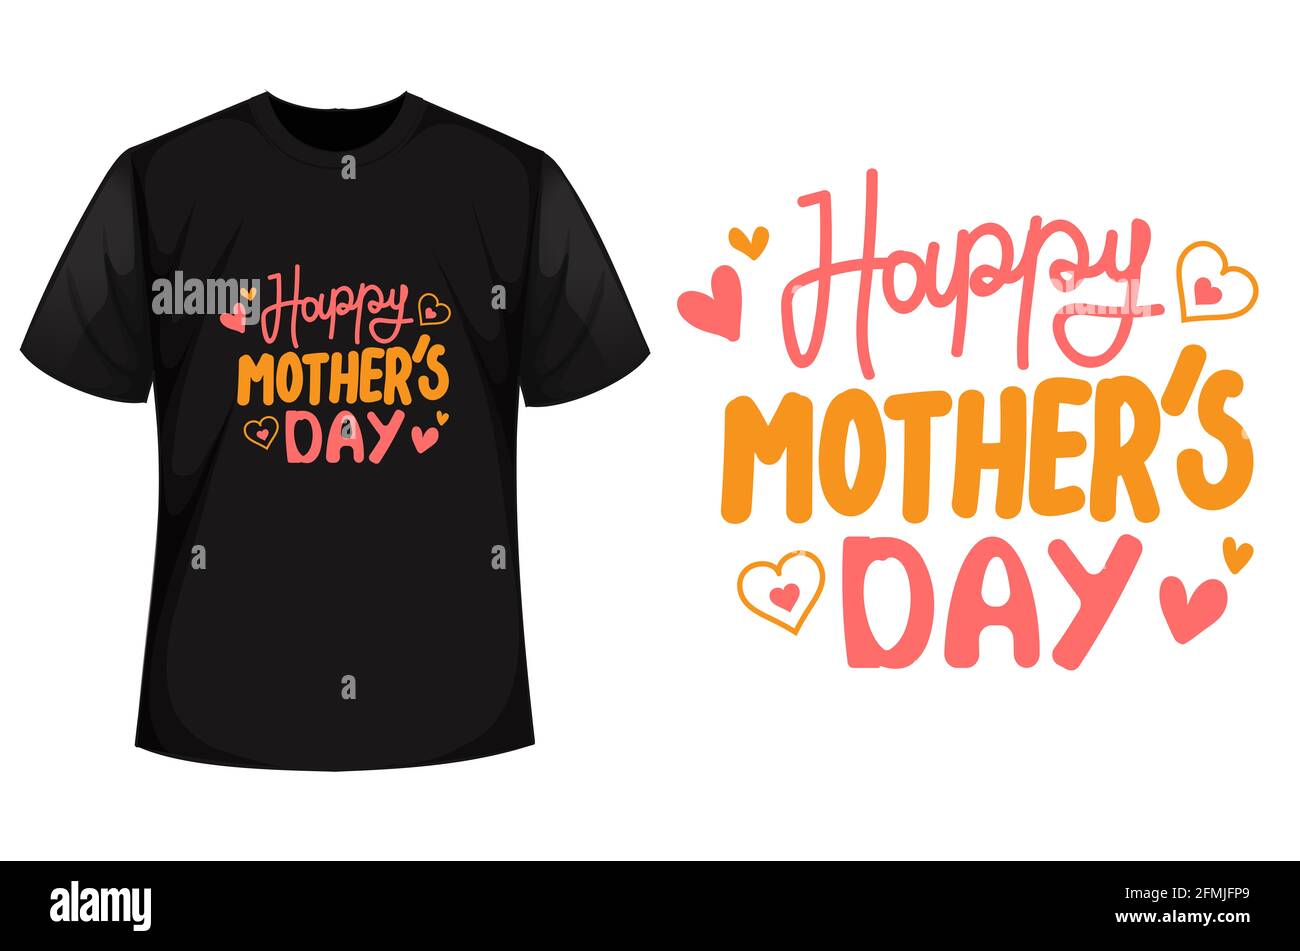 happy mother's day t-shirt design international mother's day vector design Stock Photo